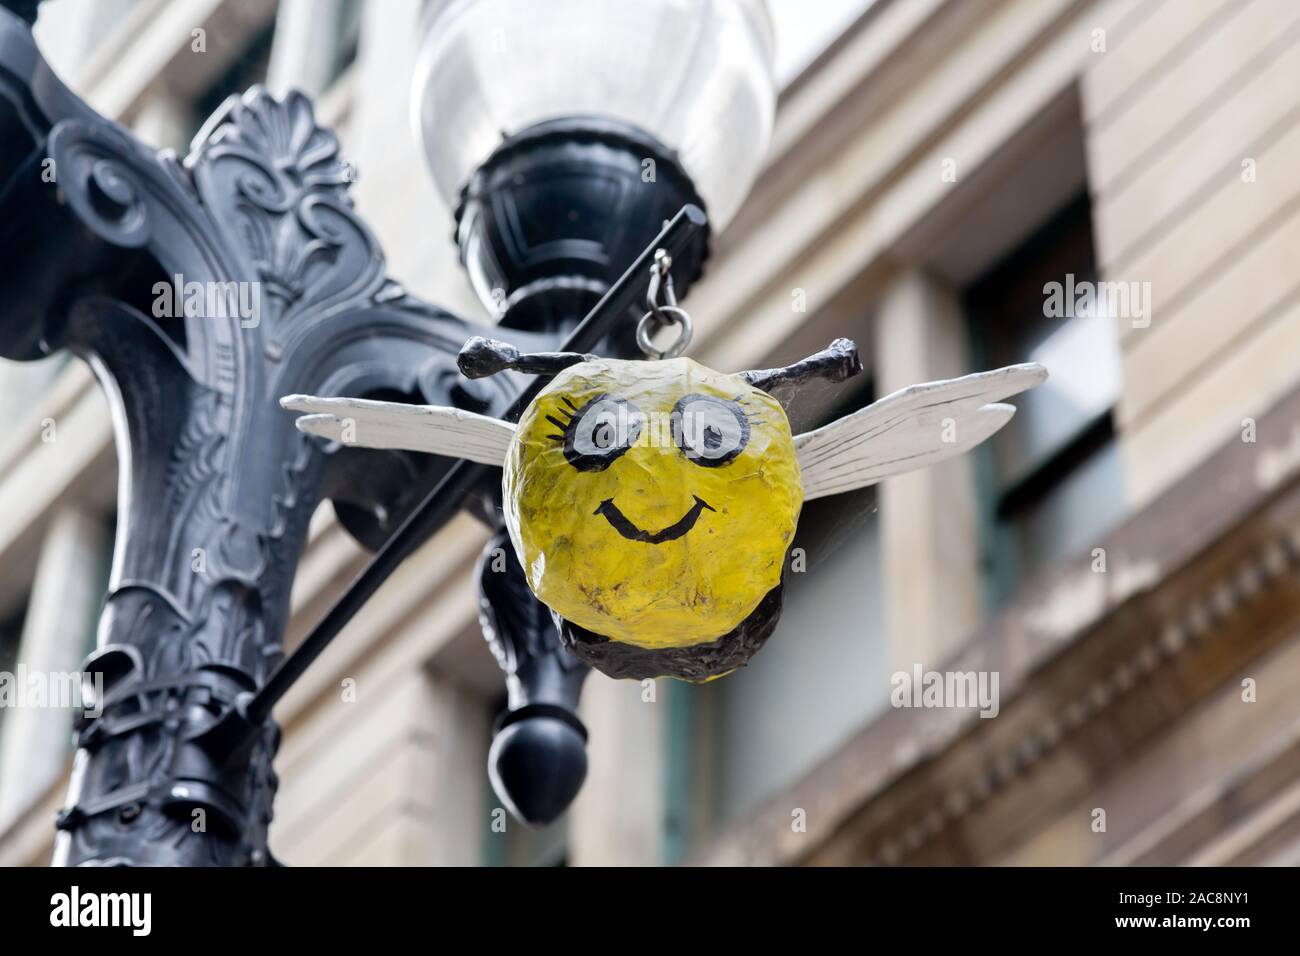 Paper Mache model hanging from streetlamp, Chicago, Illinois, USA Stock Photo